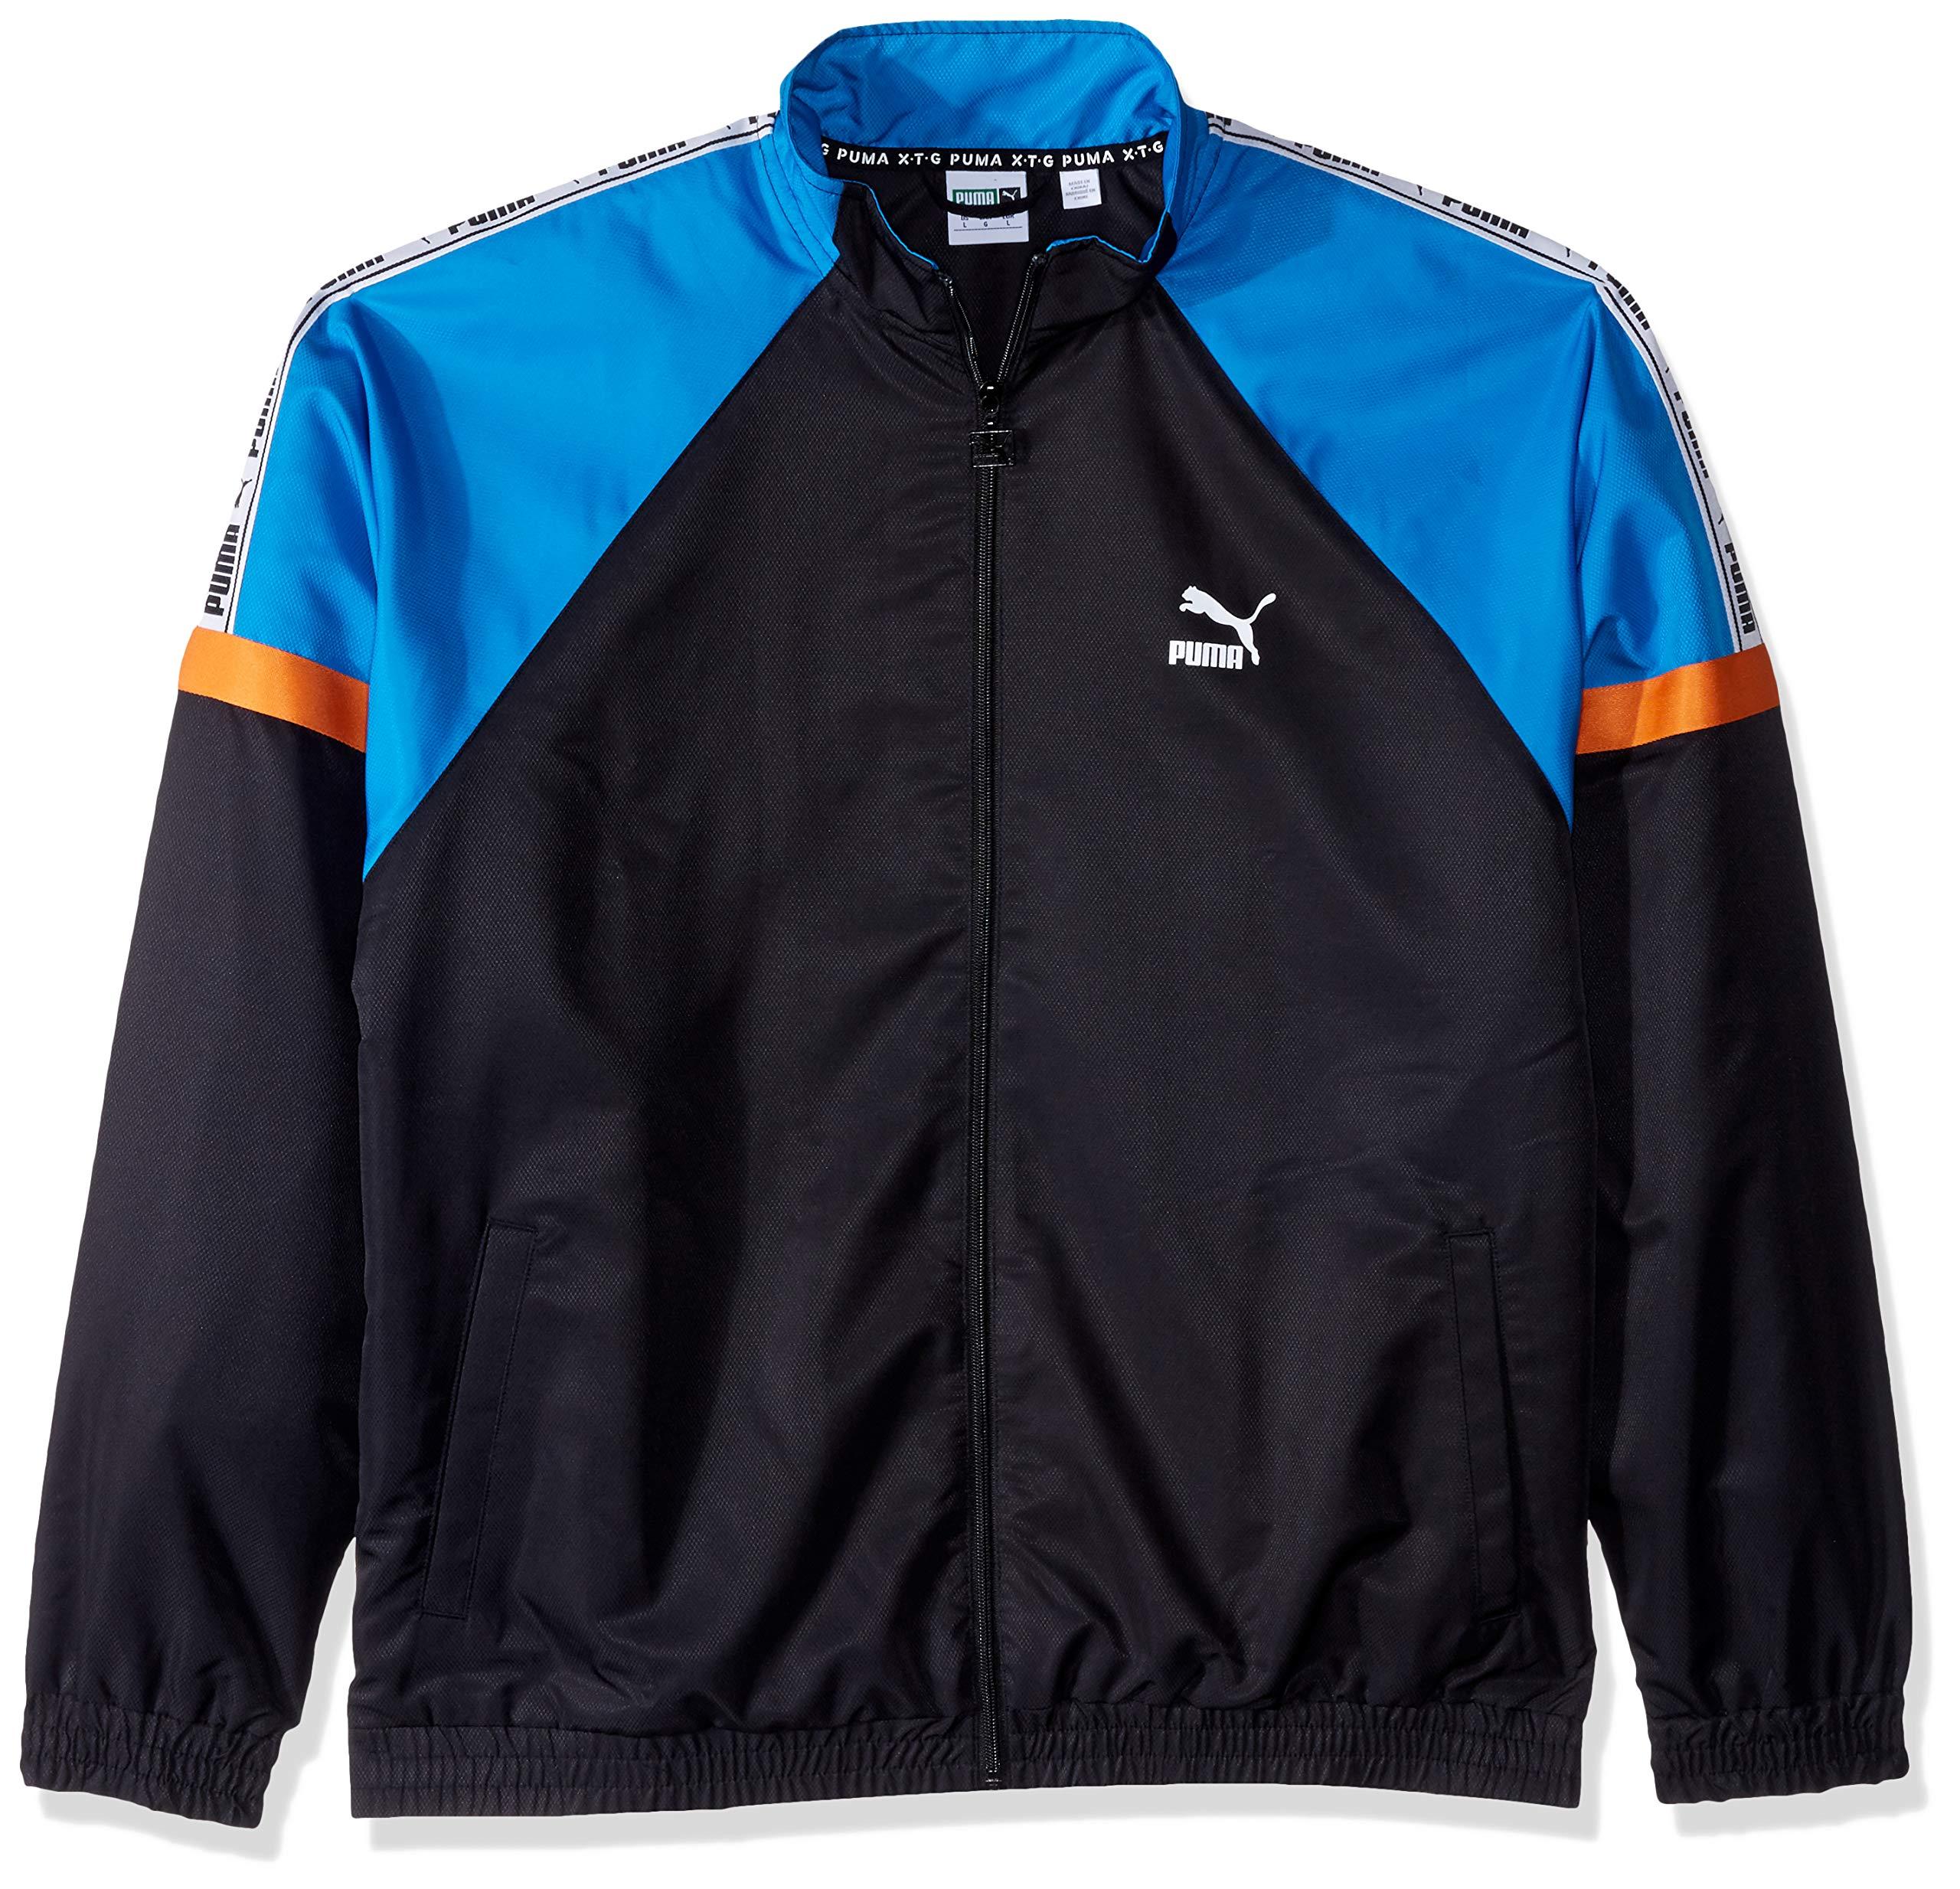 PUMA Rubber Xtg Woven Jacket in Blue for Men - Save 11% - Lyst